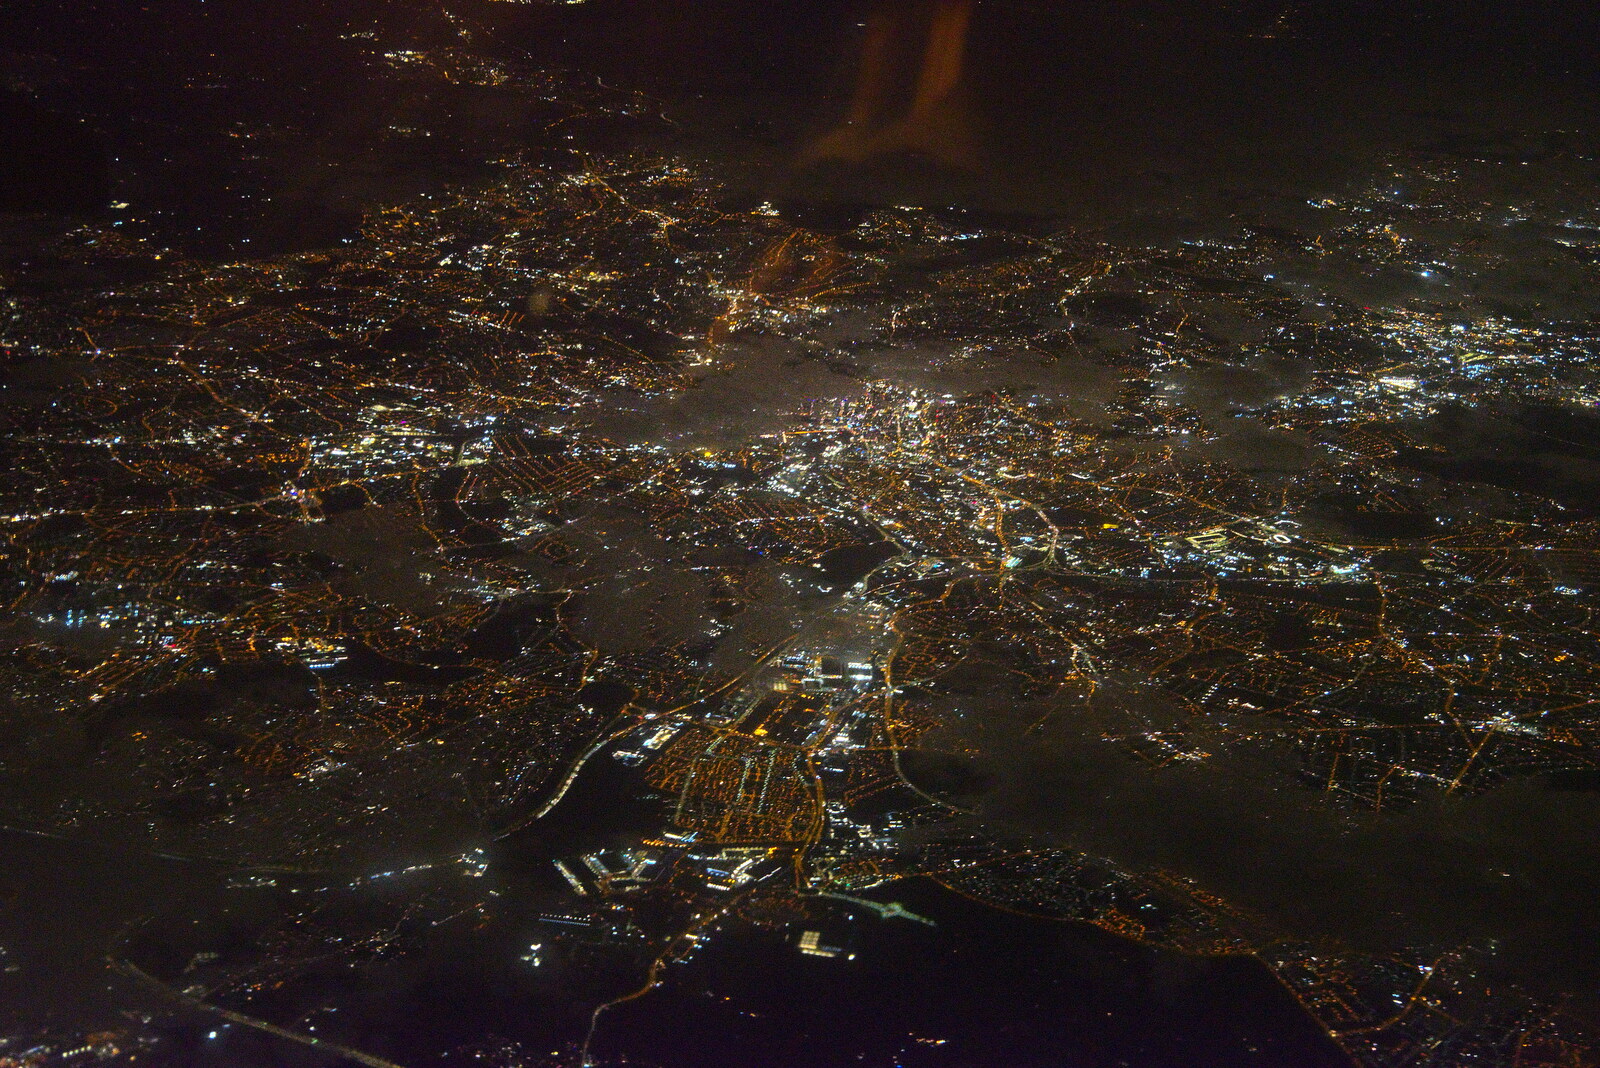 The End of the Breffni, Blackrock, Dublin - 18th February 2023: We fly over a city somewhere in England